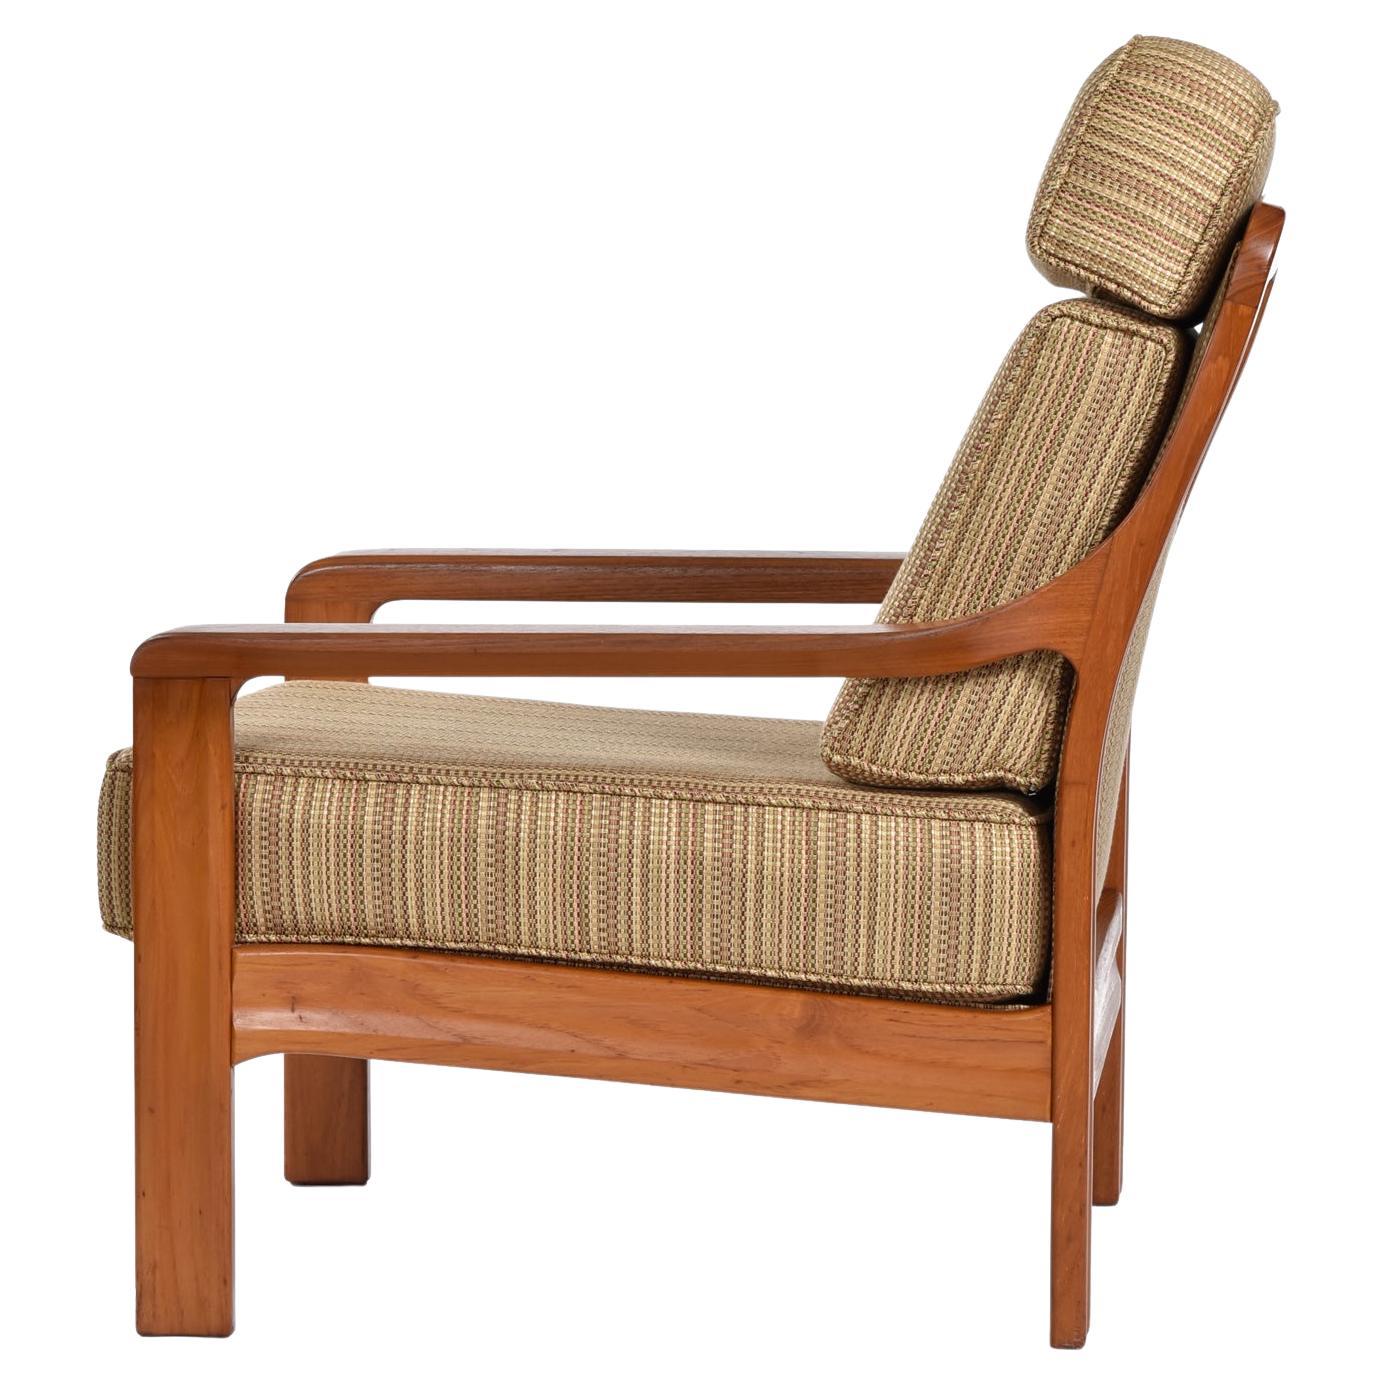 Although not marked by the maker, this exceptional, vintage, solid teak armchair has a distinctive Danish modern design but may actually be Canadian. The chair features an upholstered back framed out with sculpted teak. The blade style arms slope up